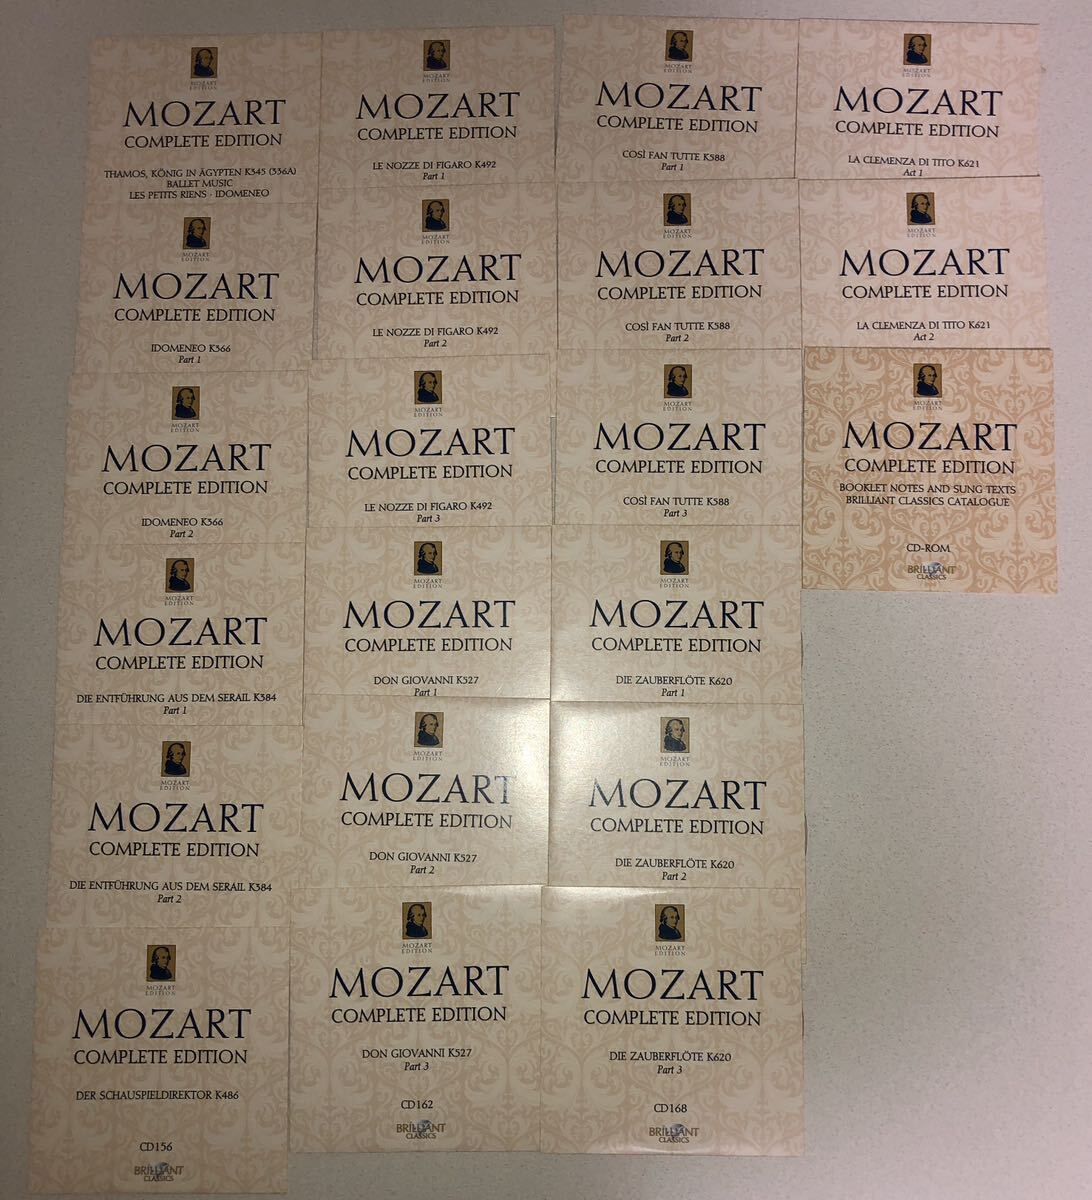 MOZART COMPLETE EDITION Complete Works on CD (170 CD + CD-ROM)ブリリアント社製 モーツァルト全集の画像10